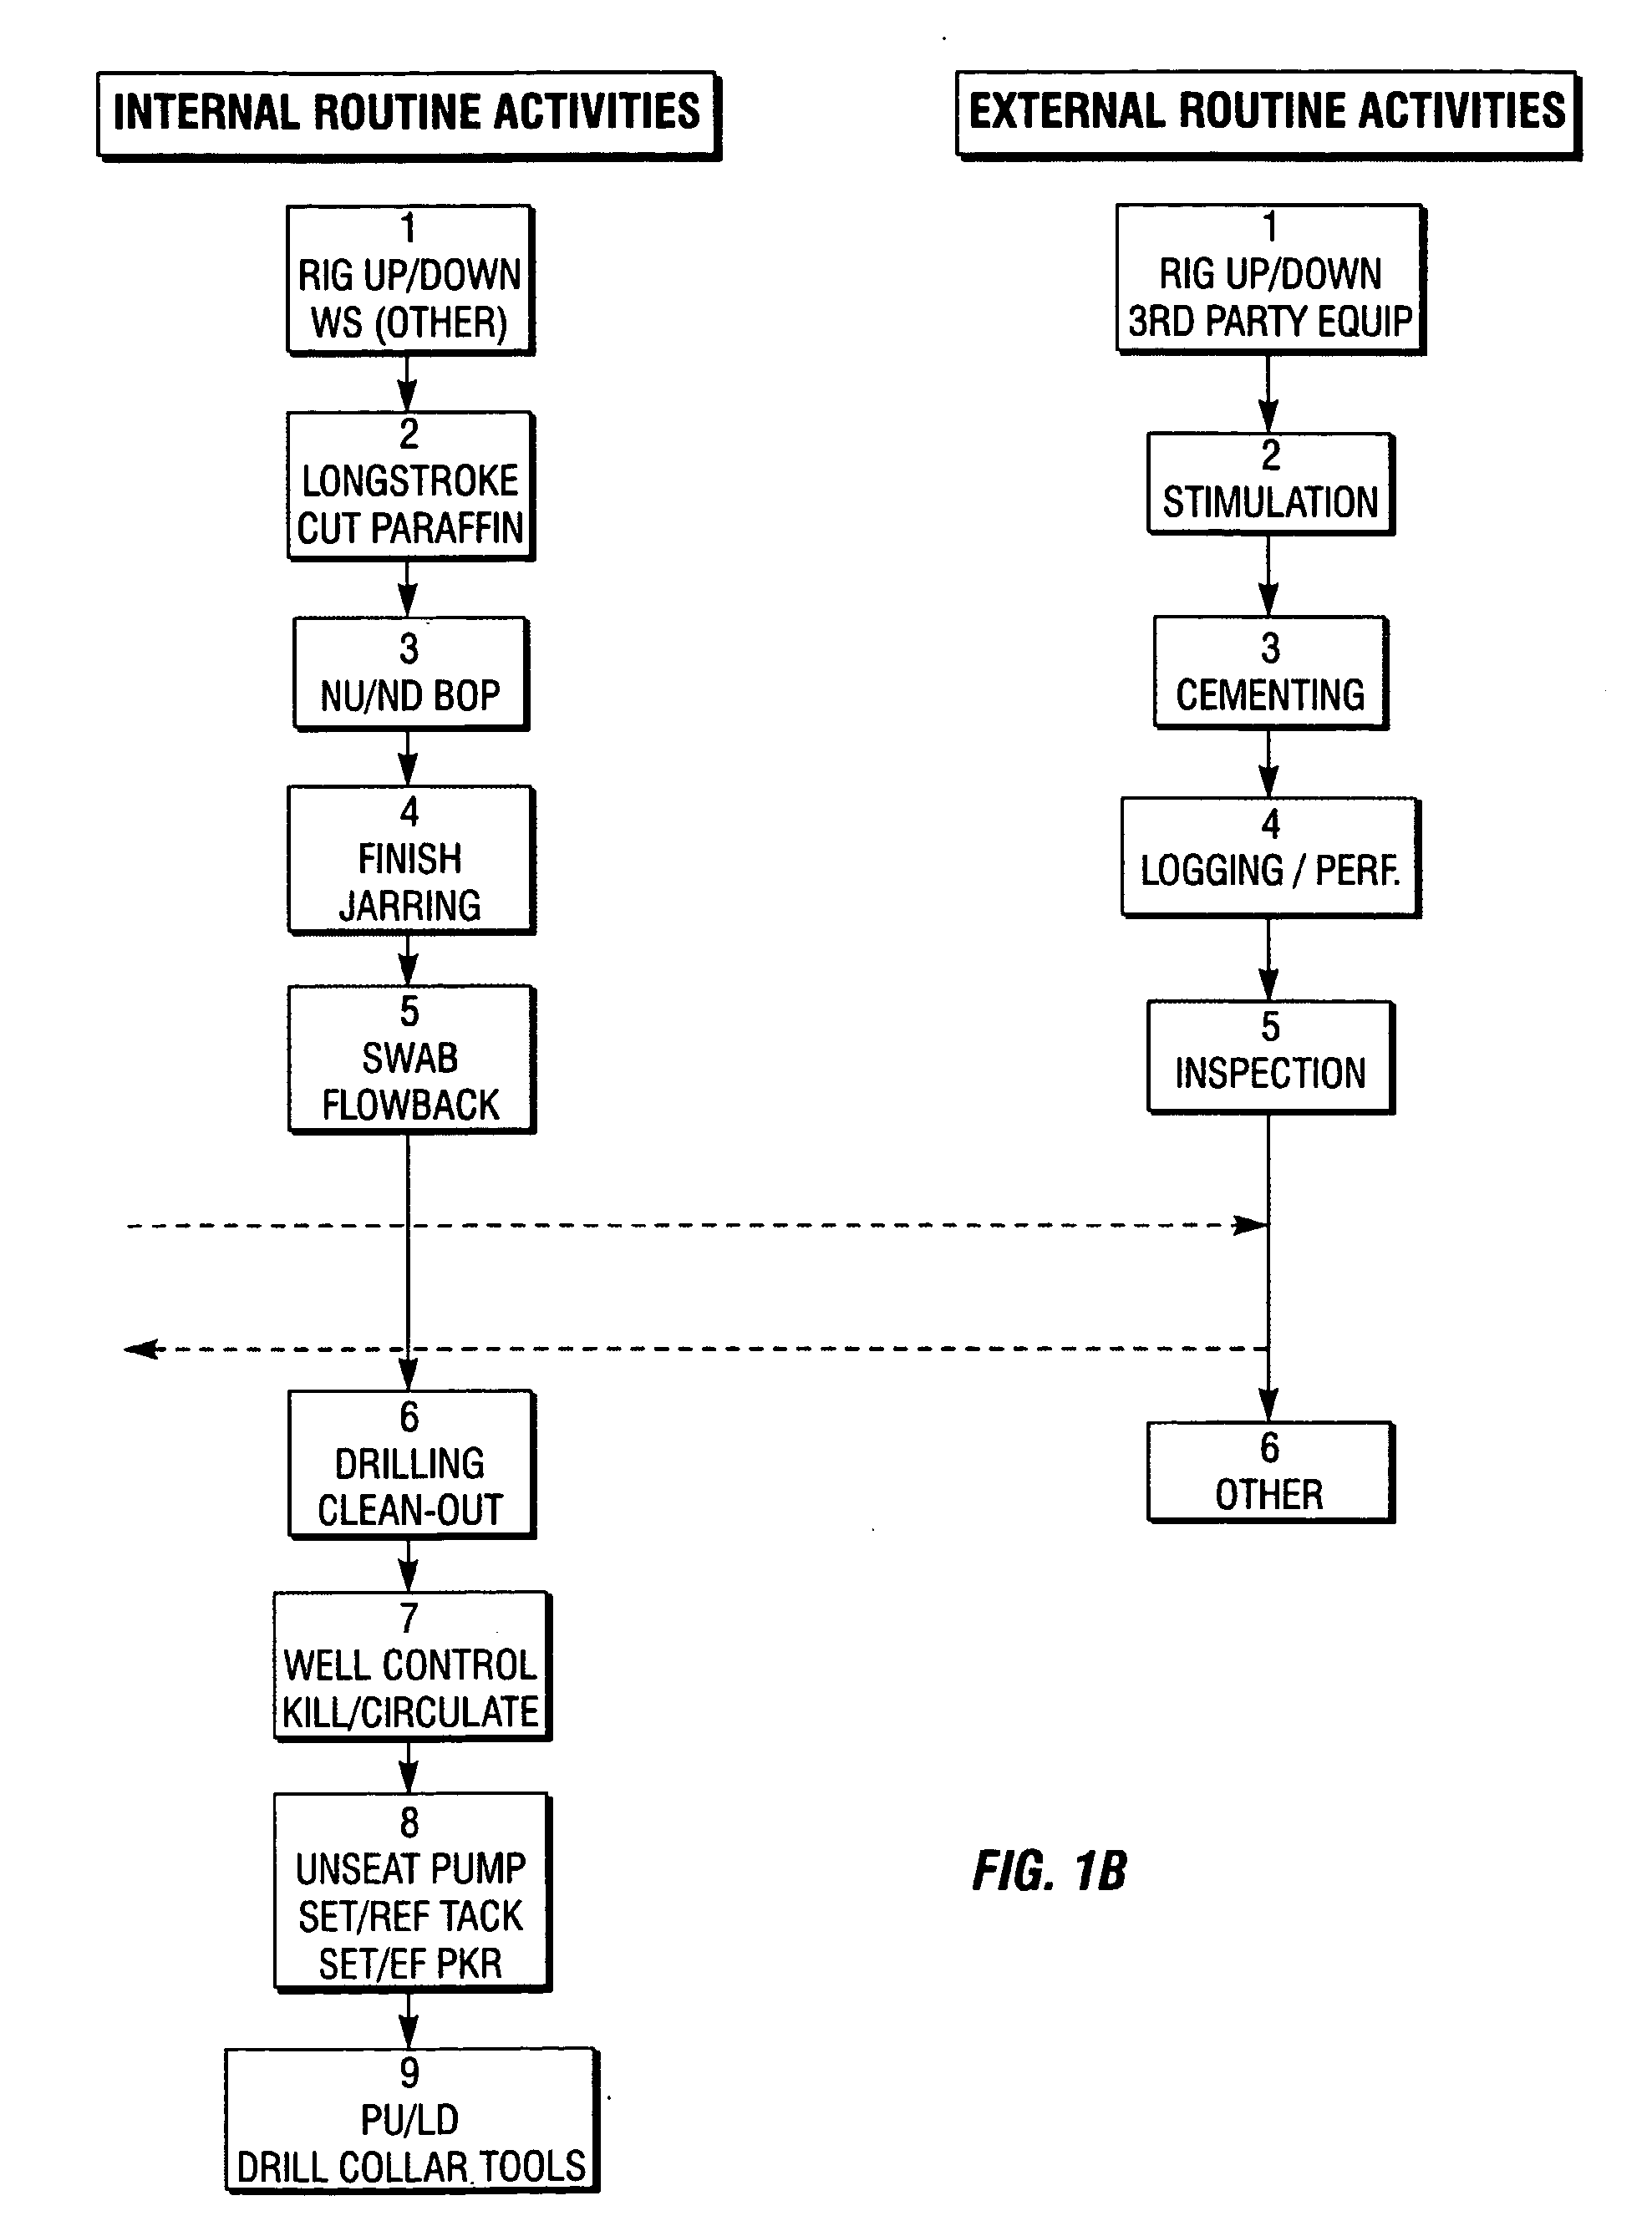 Activity data capture system for a well service vehicle